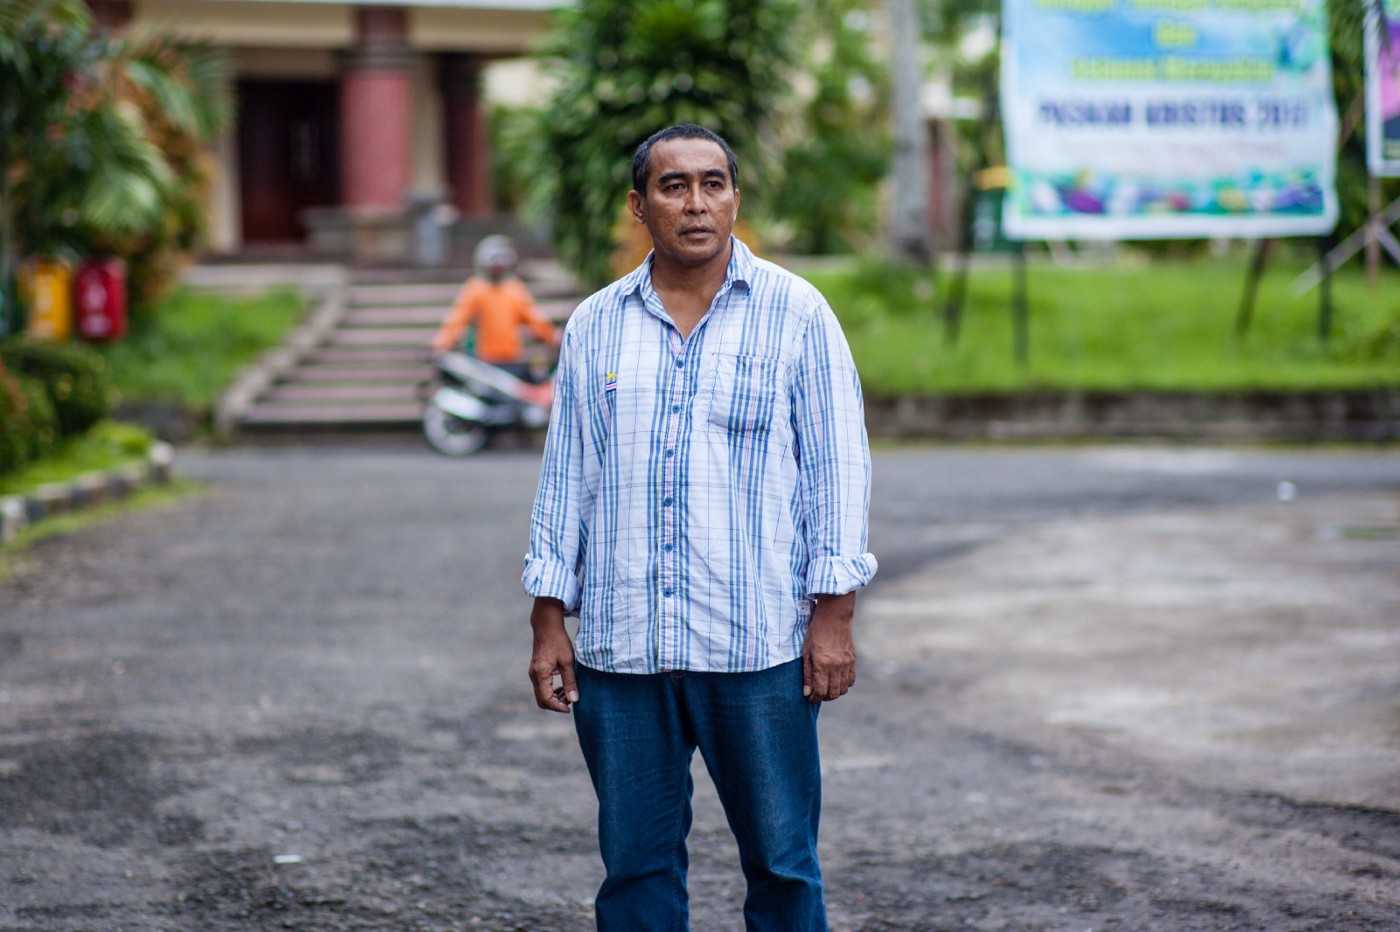 Jacky Manuputty at the headquarters of the Protestant Church of Maluku in Ambon, in 2017. By Leo Plunkett/The Gecko Project.